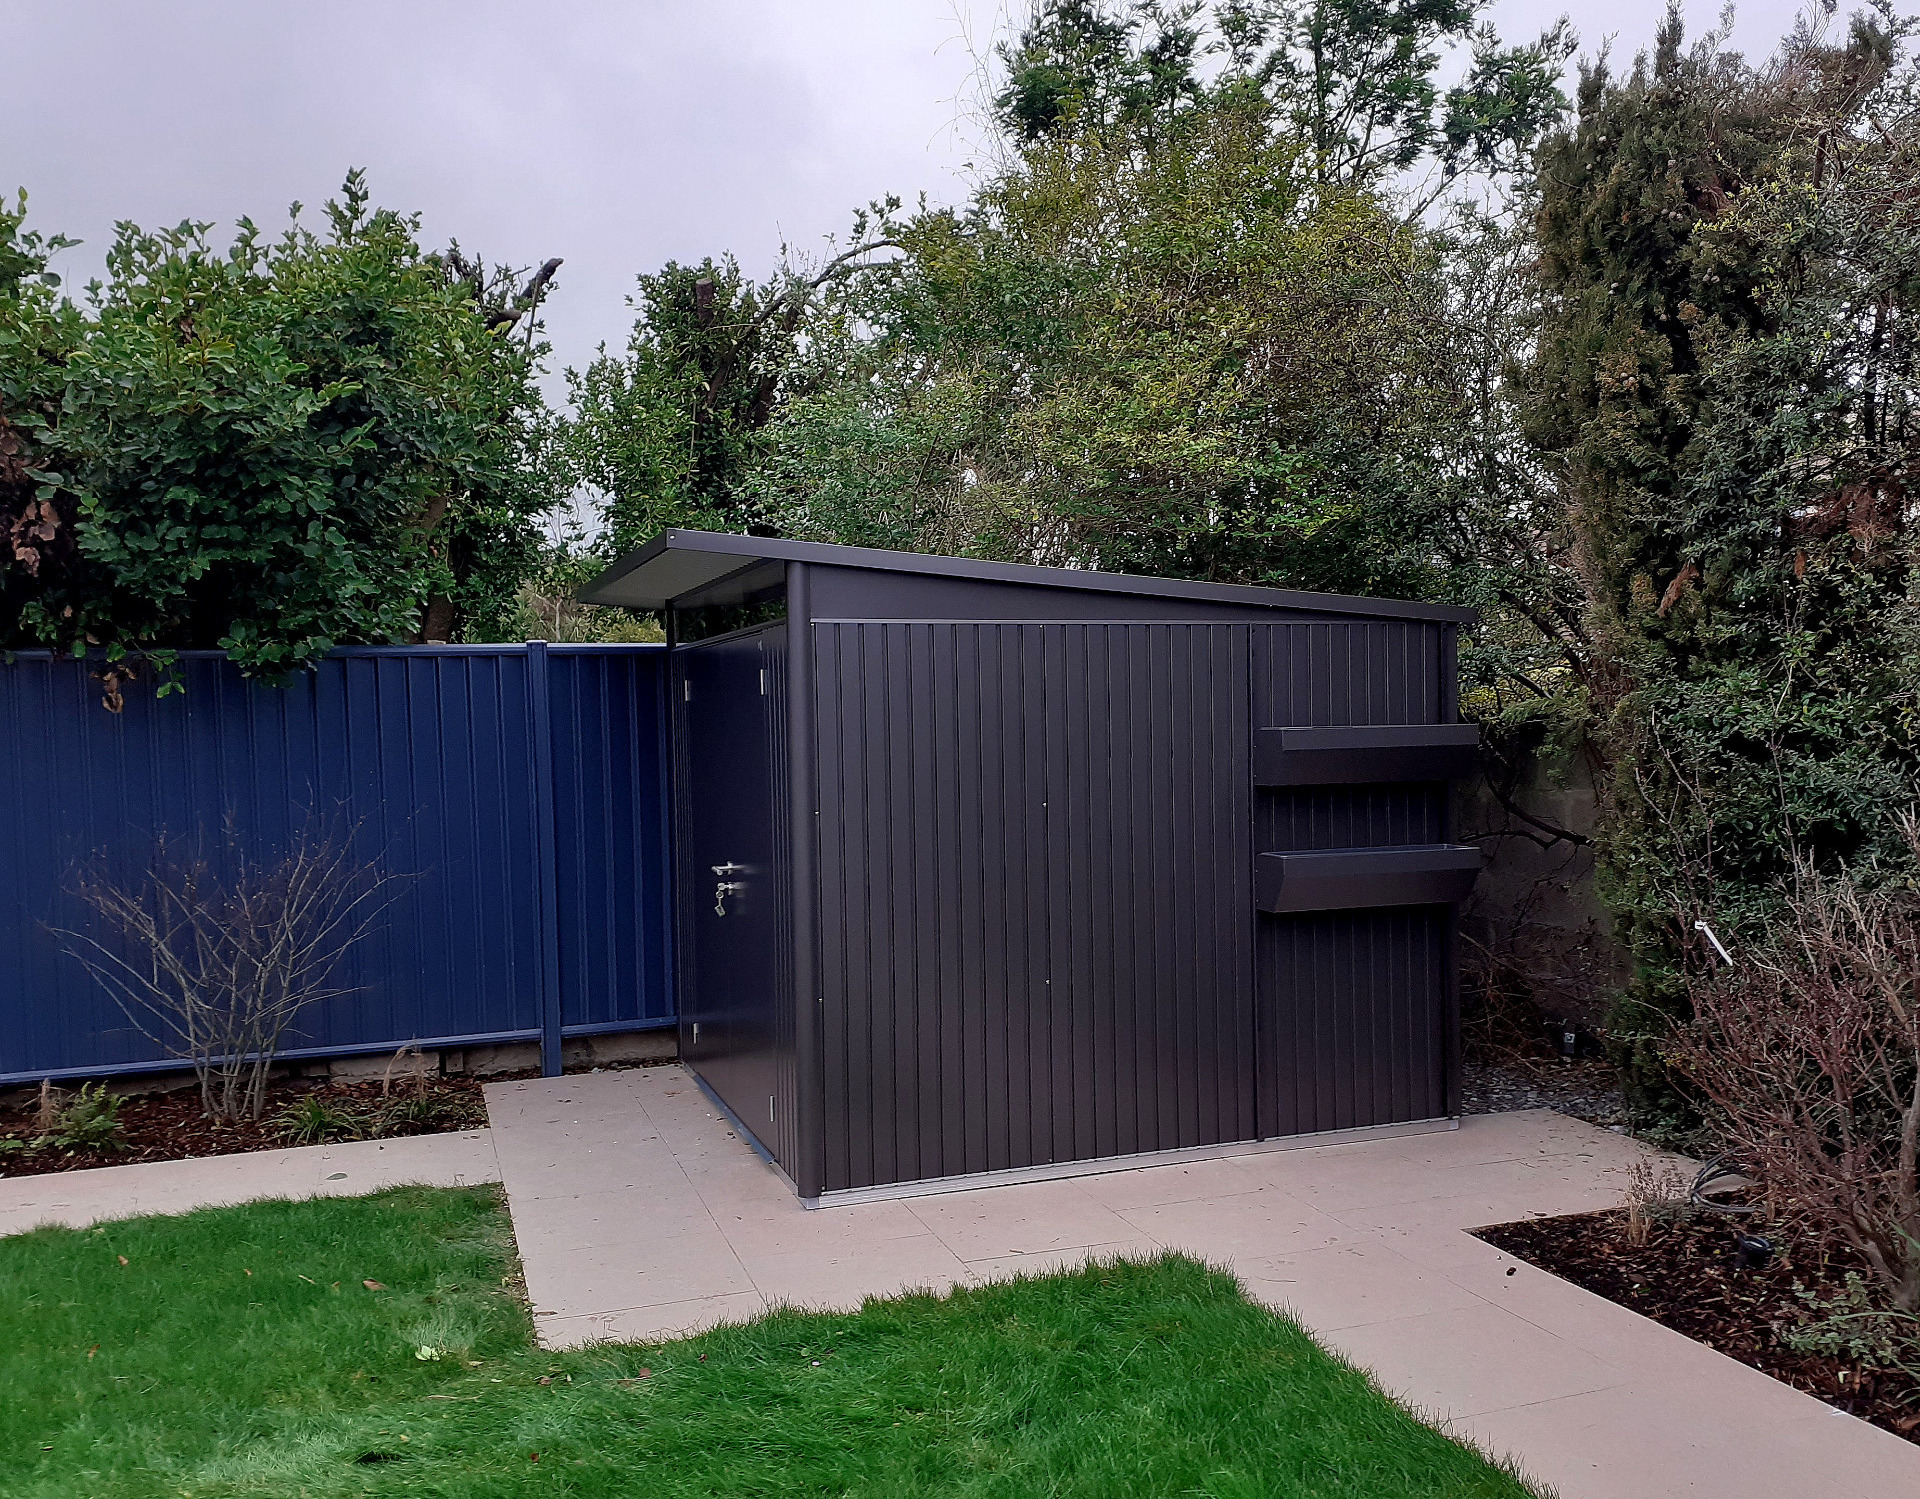 Biohort AvantGarde A7 Garden Shed in metallic dark grey with double doors, supplied & fitted in Blackrock, Co Dublin  | Owen Chubb Ireland's Leading supplier of Biohort Garden Sheds & Storage Solutions | Supplied + Fitted Nationwide